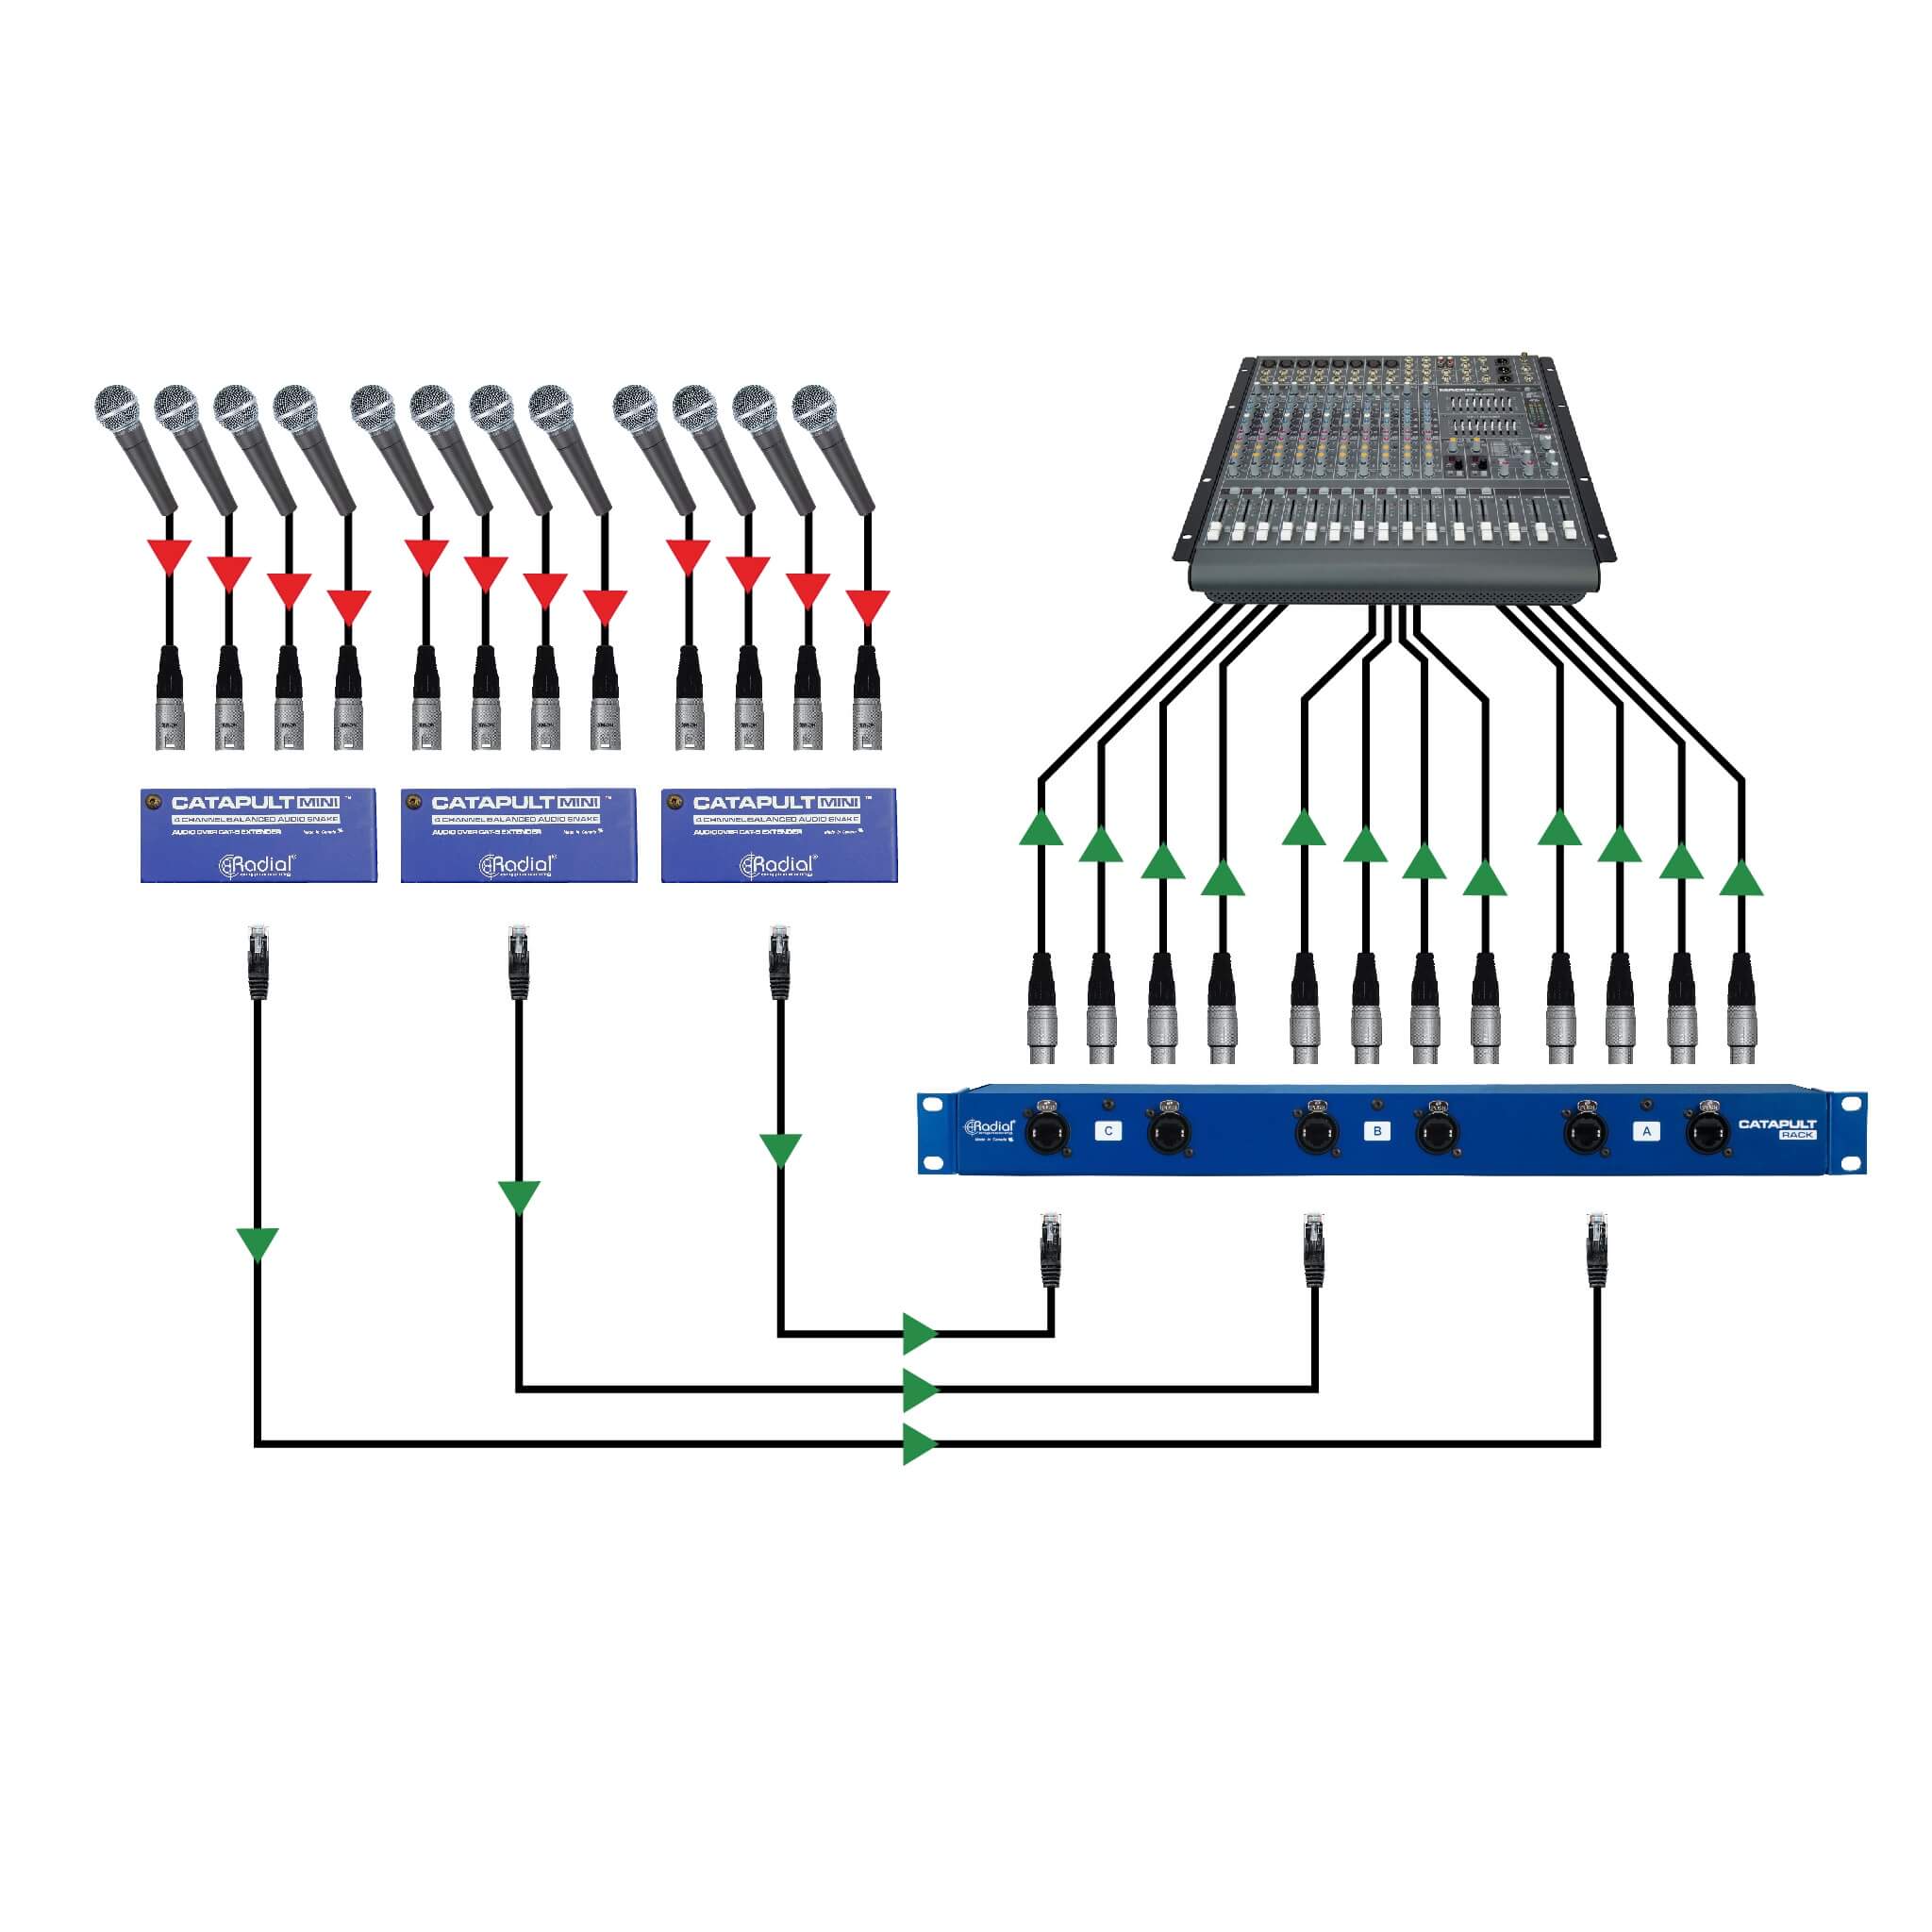 Radial Catapult Rack RX - 12-channel Cat 5 Analog Audio Snake Receiver, application 2